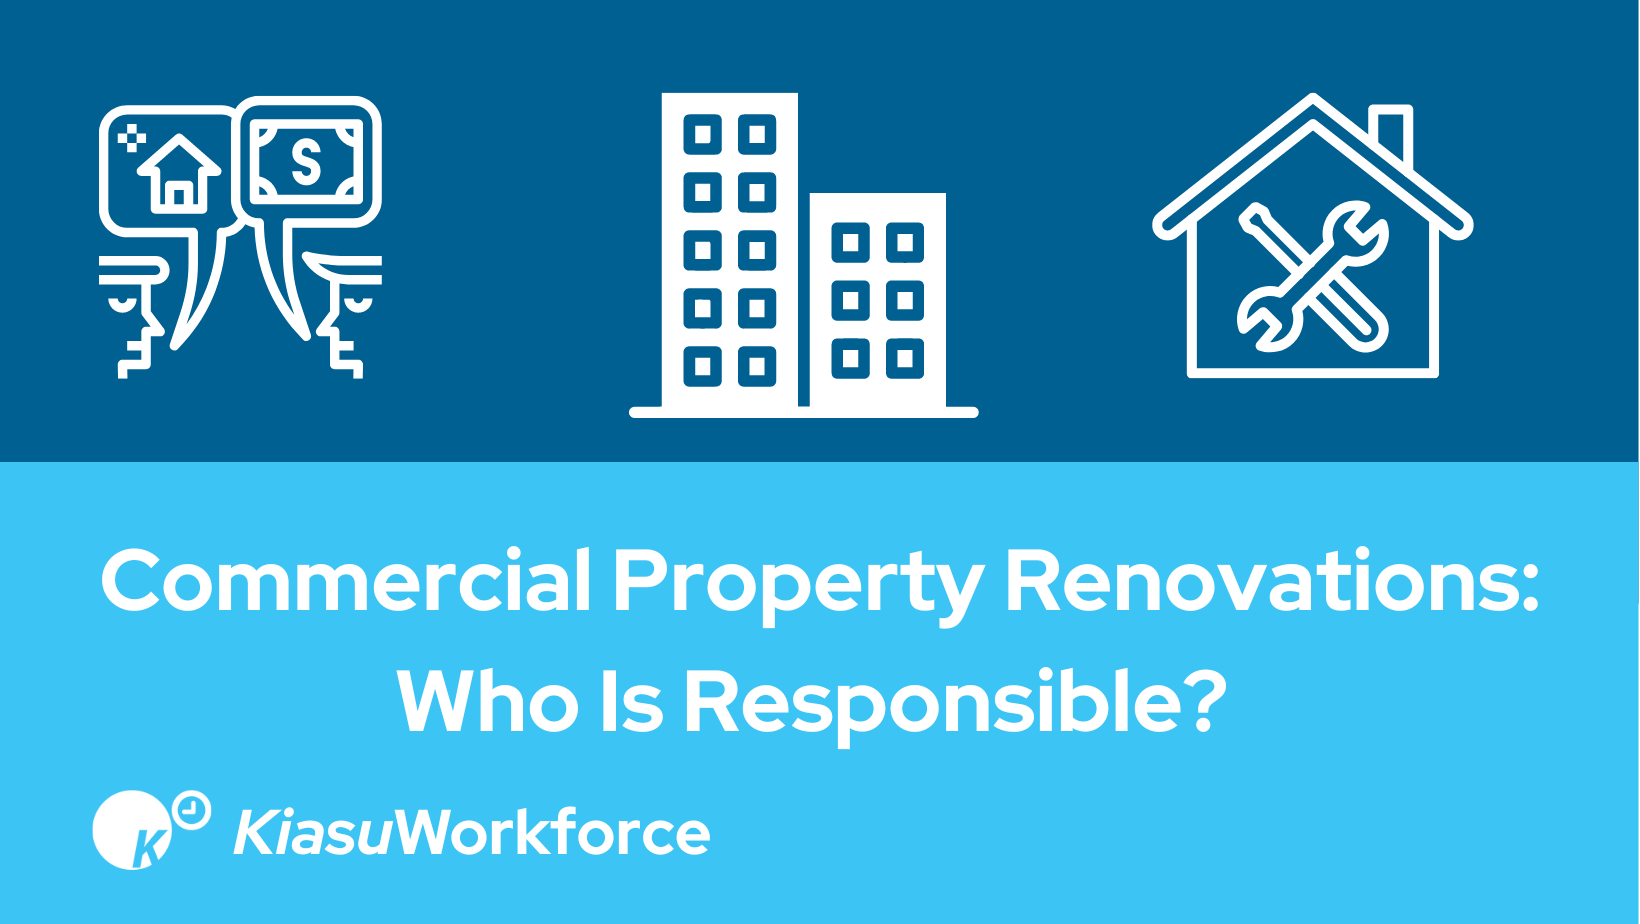 Commercial Property Renovations: Who Is Responsible?